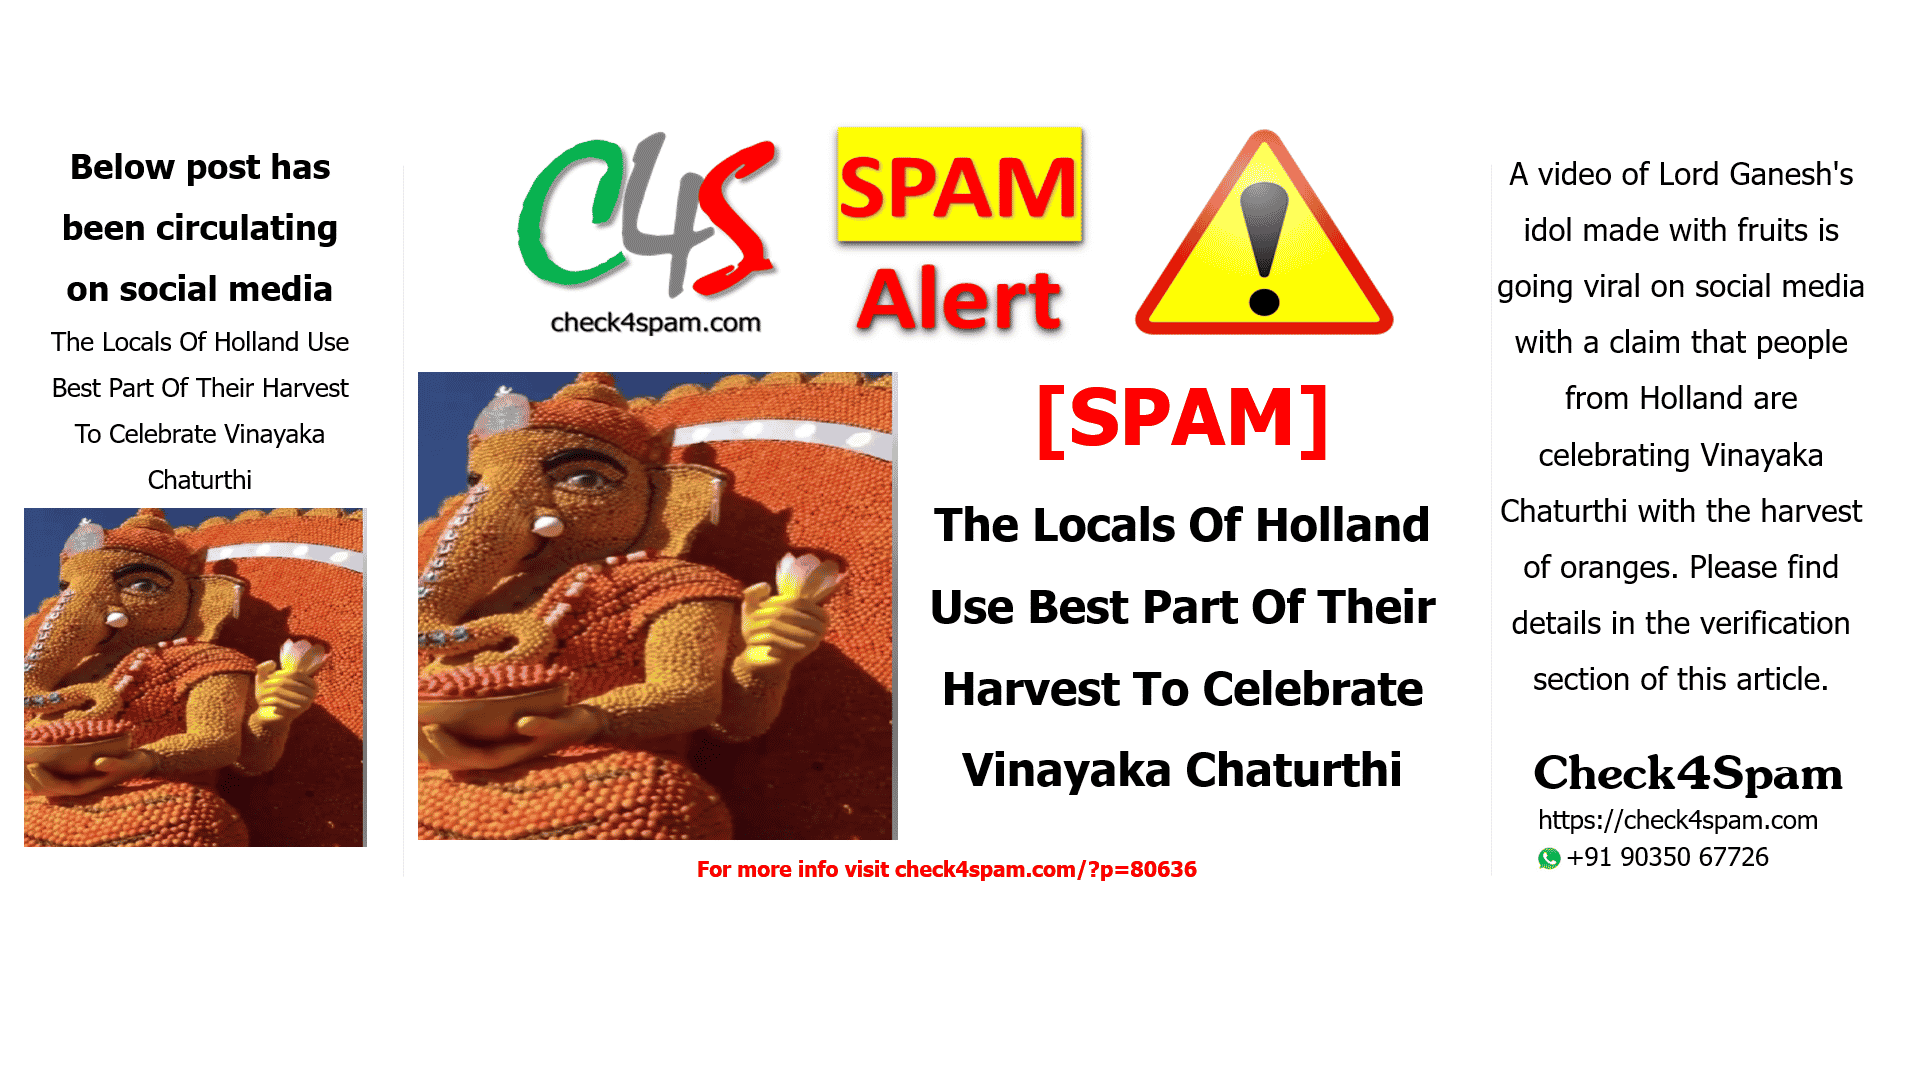 The Locals Of Holland Use Best Part Of Their Harvest To Celebrate Vinayaka Chaturthi